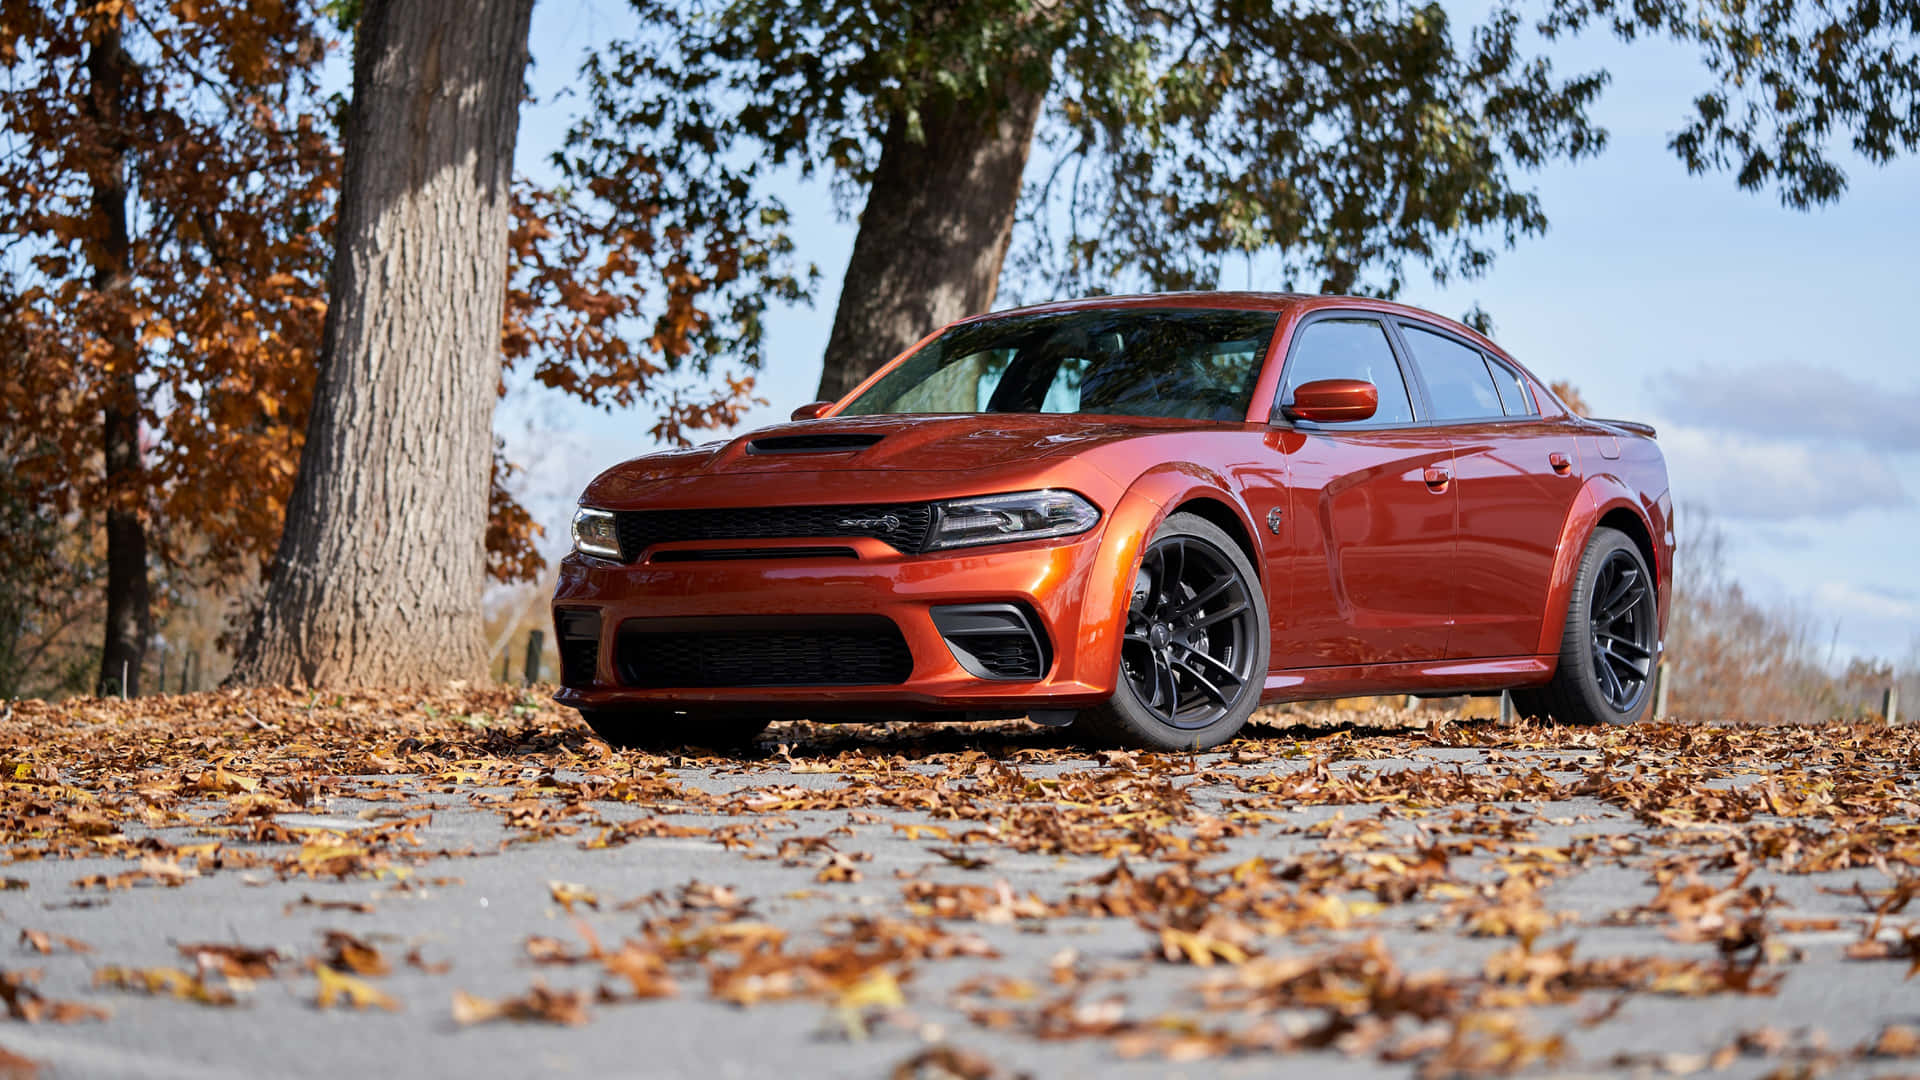 The 2019 Dodge Charger Srt Parked In The Fall Wallpaper